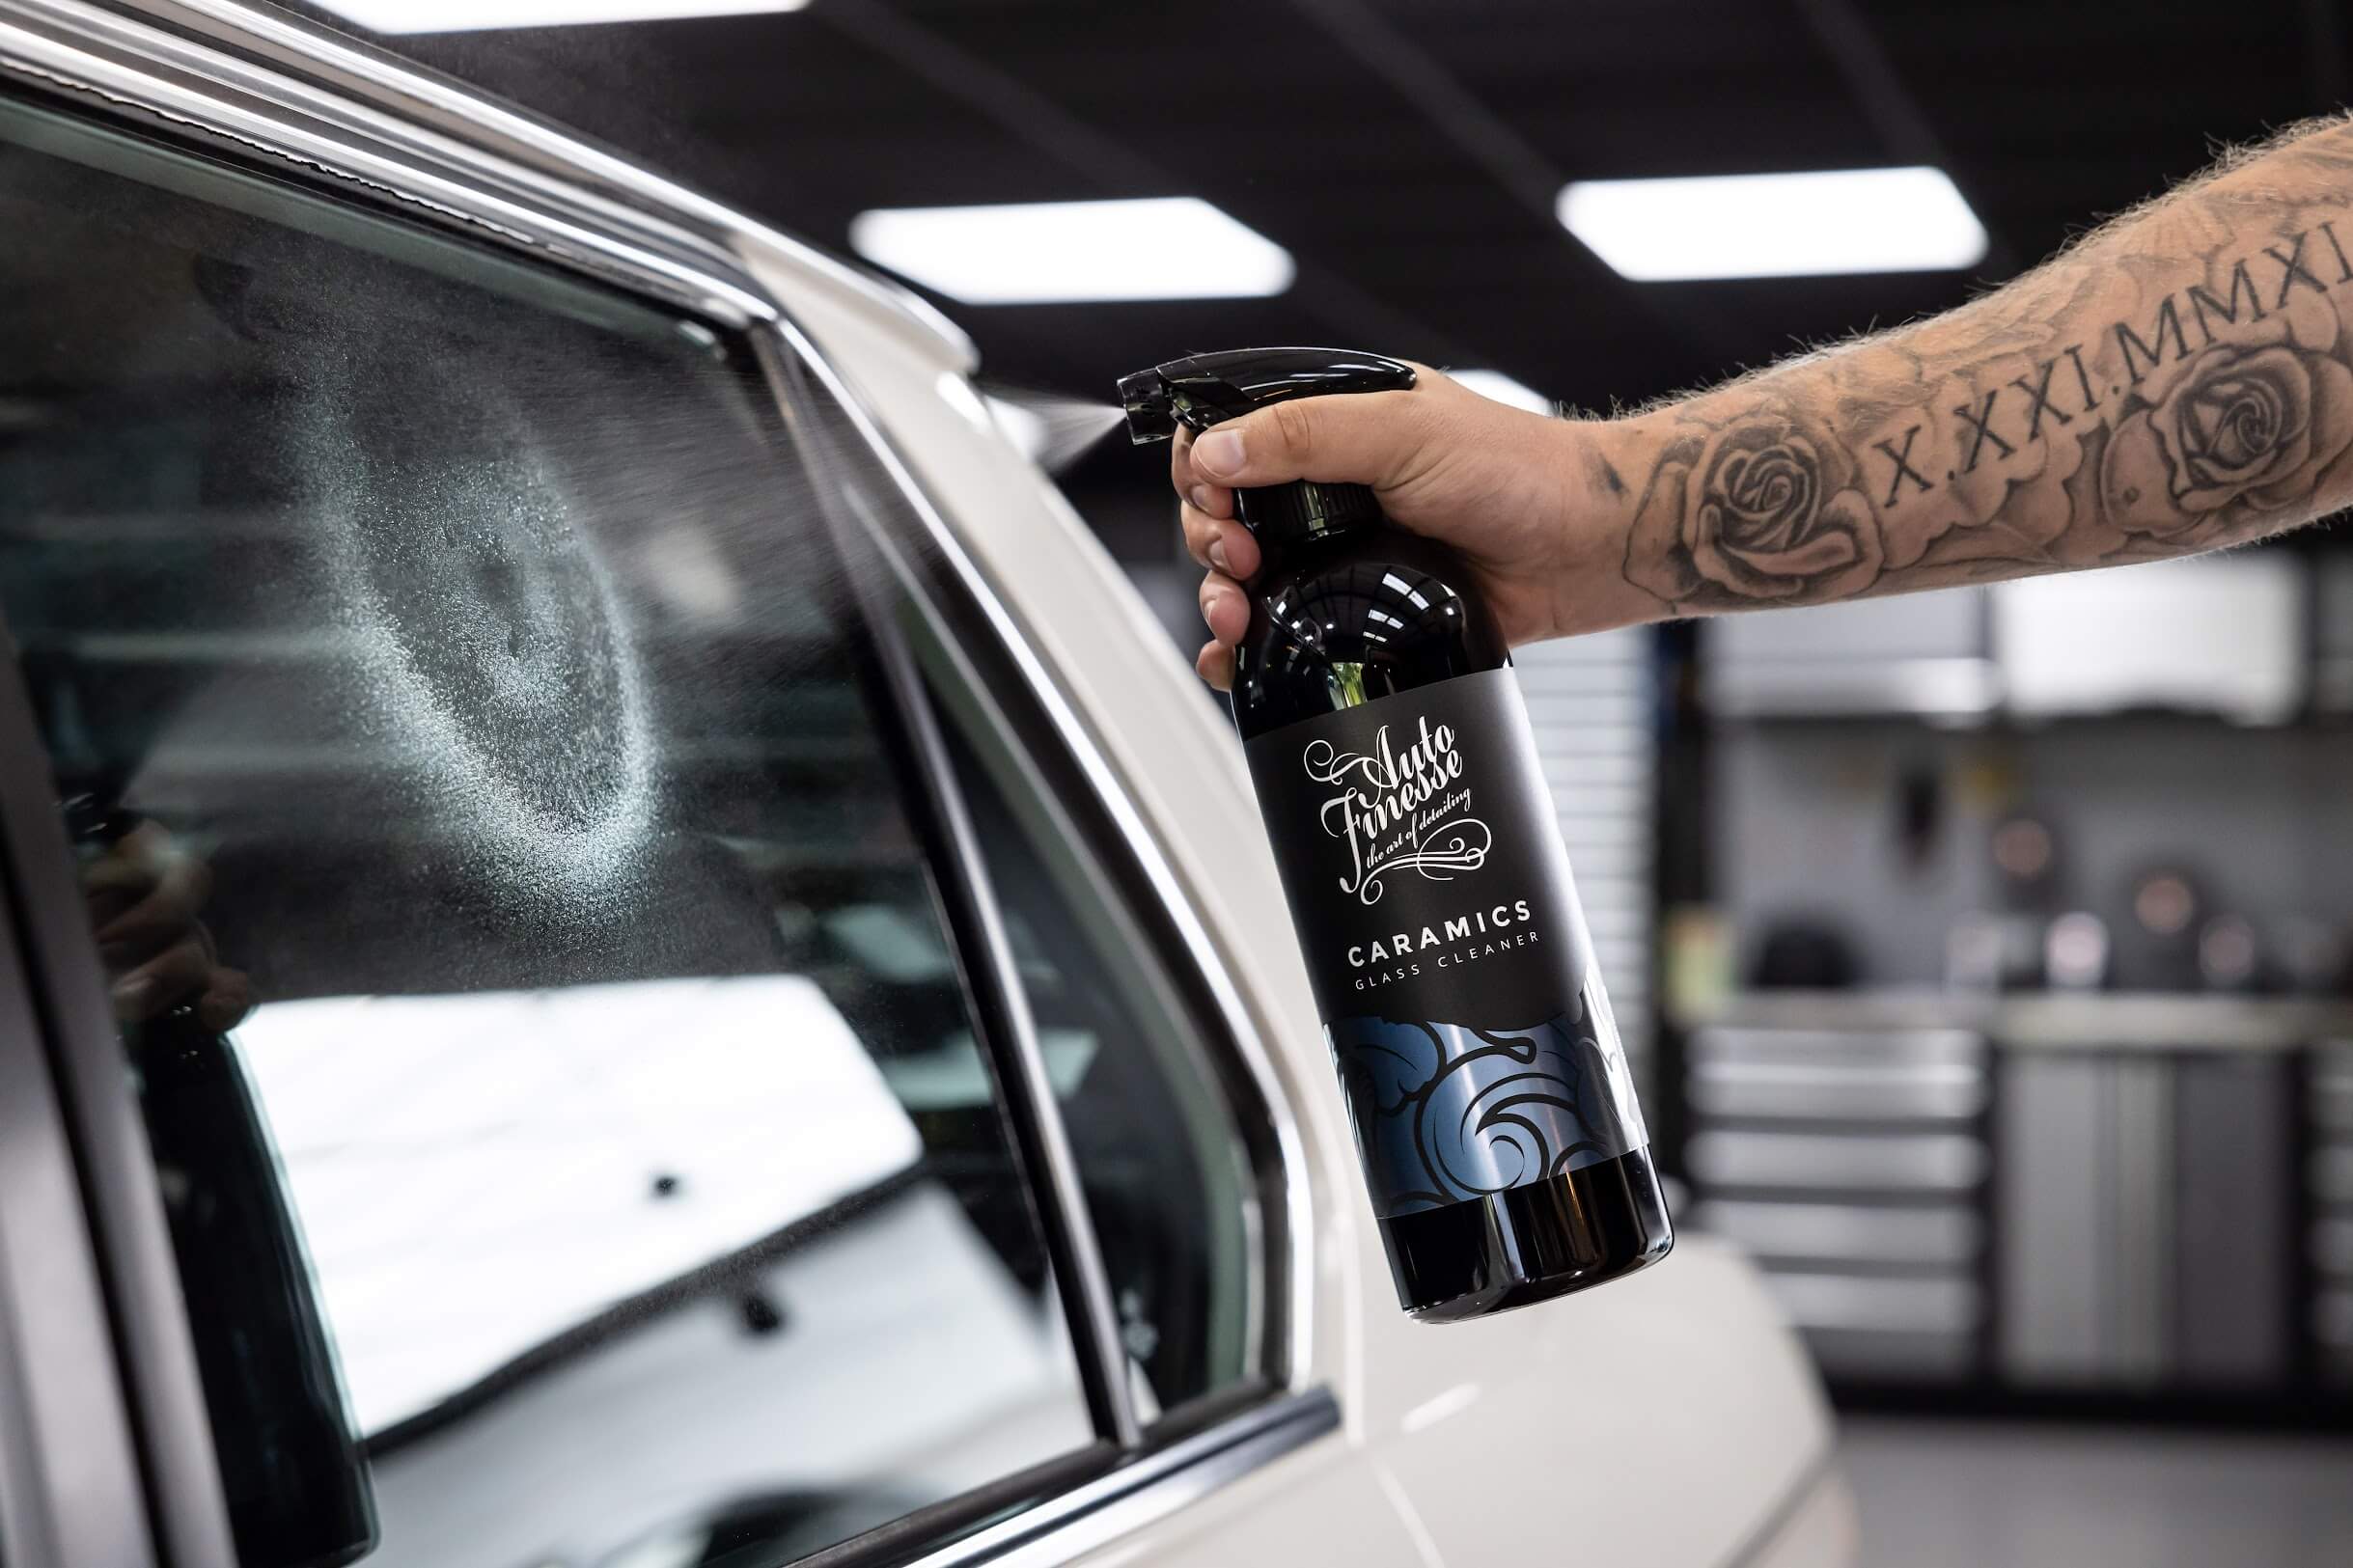 Auto Finesse | Ceramic Infused Glass Cleaner | Glass Coatings